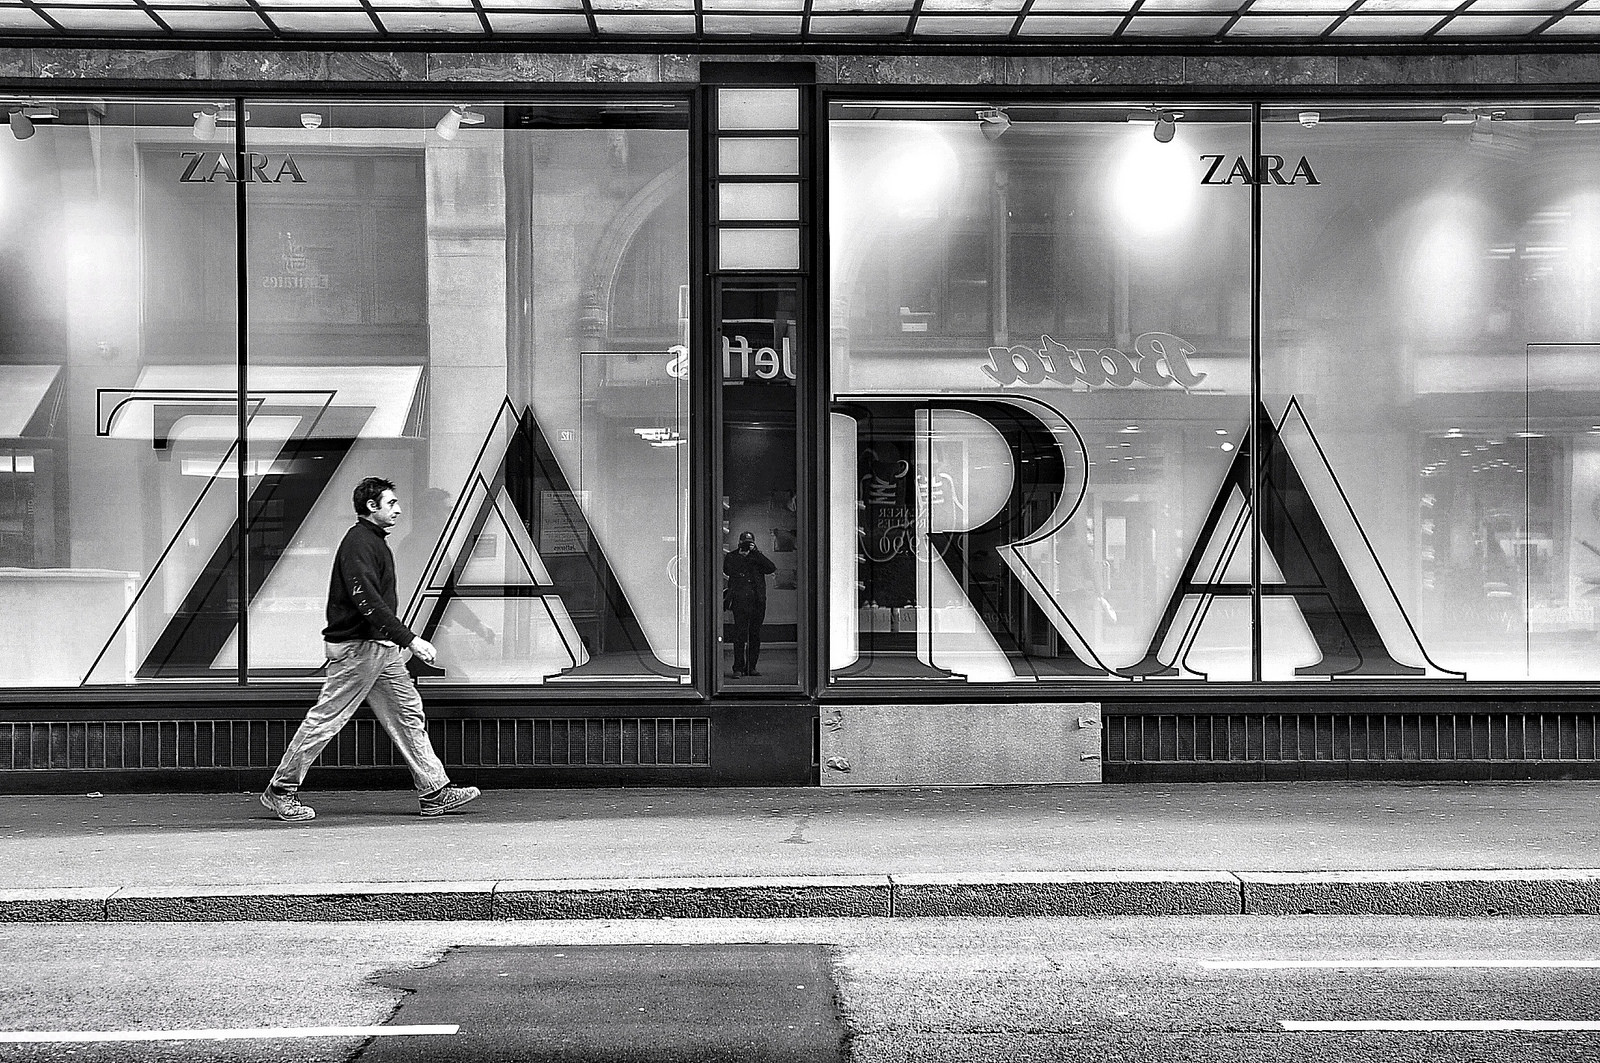 The Rise of Zara, Upscale Clothing Brand - Industry News Corp ...